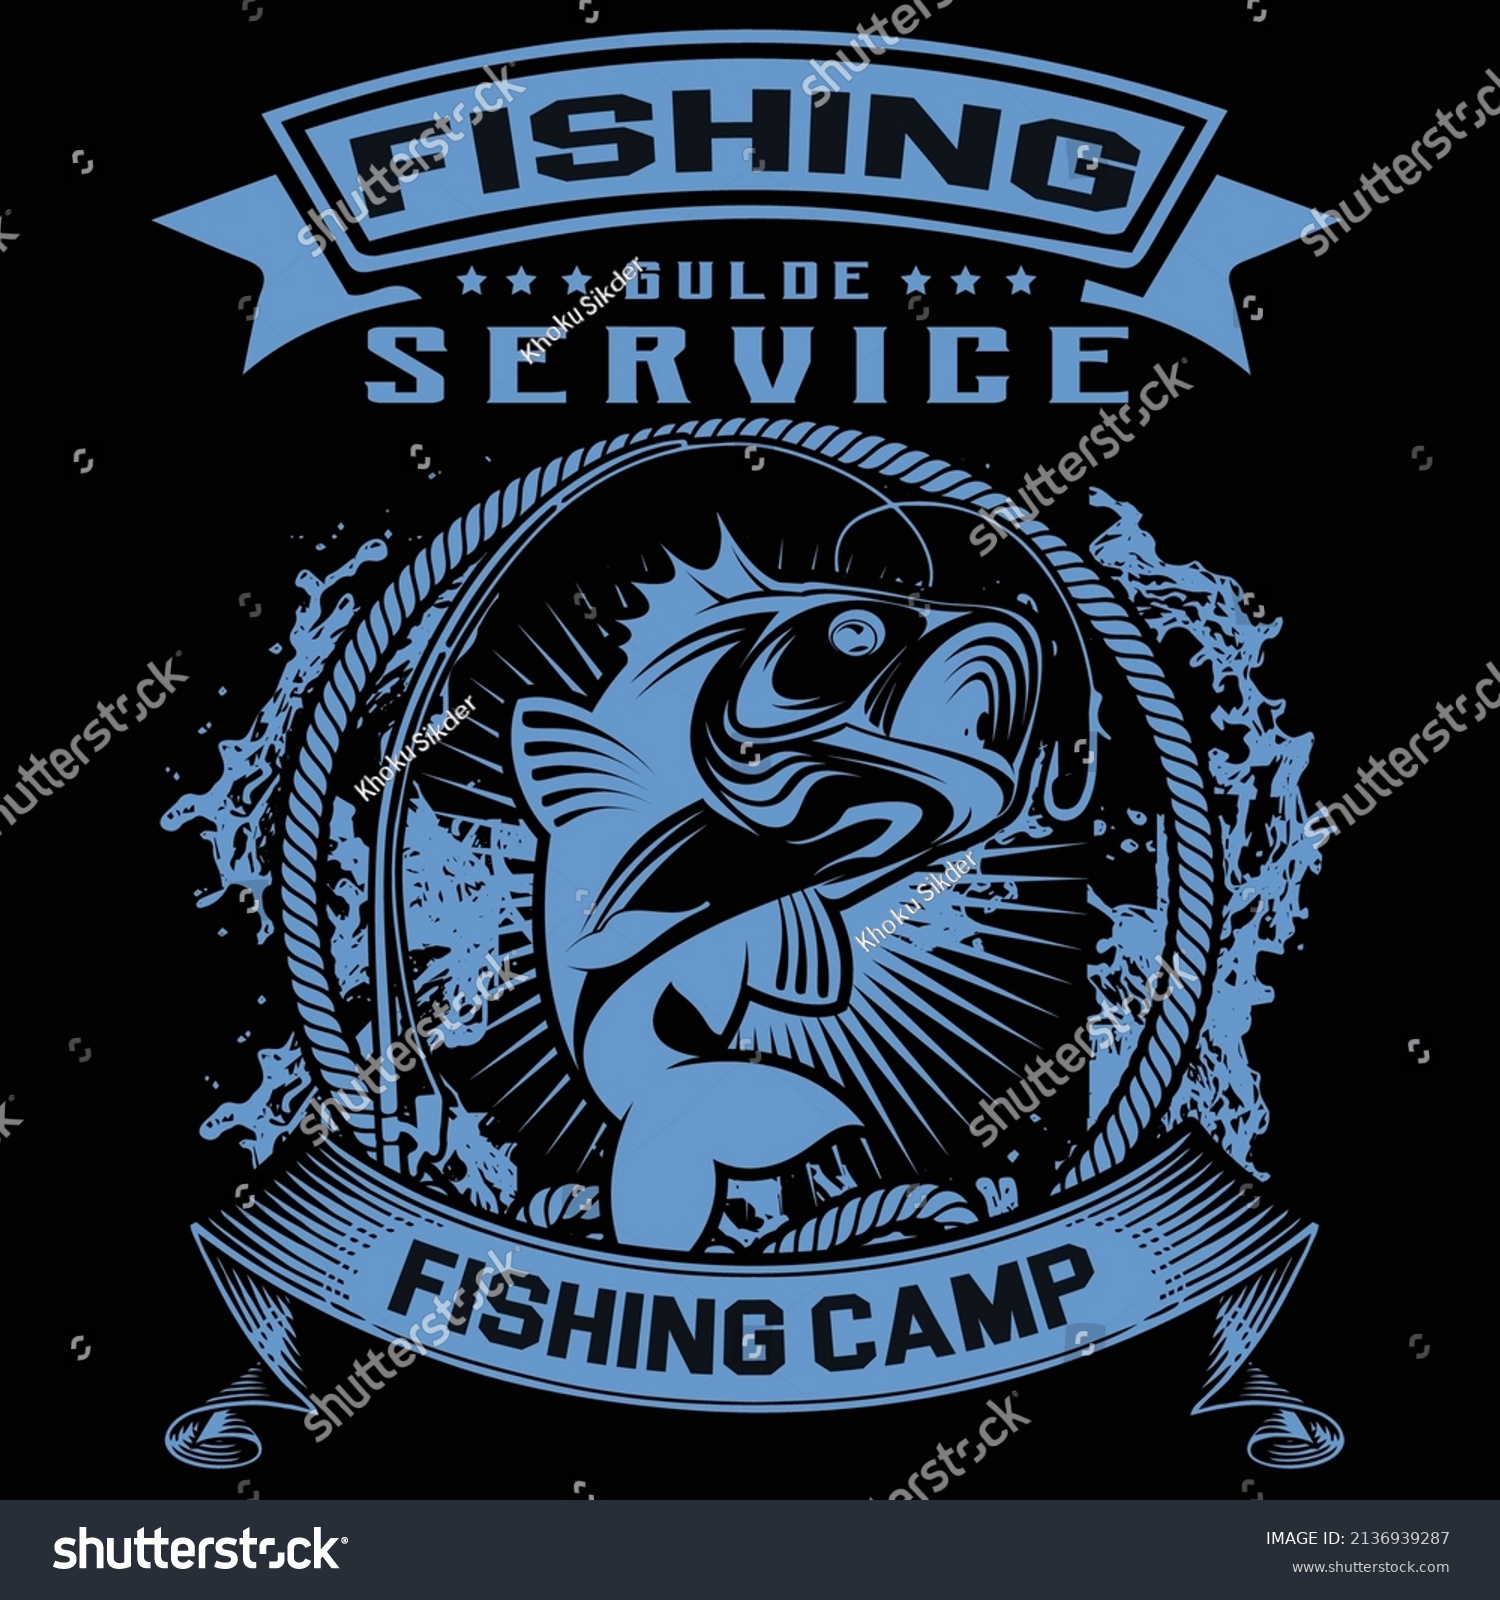 SVG of Fishing tshirt design vector, Fishing T Shirts Design, Vector Graphic, Typographic Poster or T-shirt Stock Vector - Illustration of fishing, graphic svg